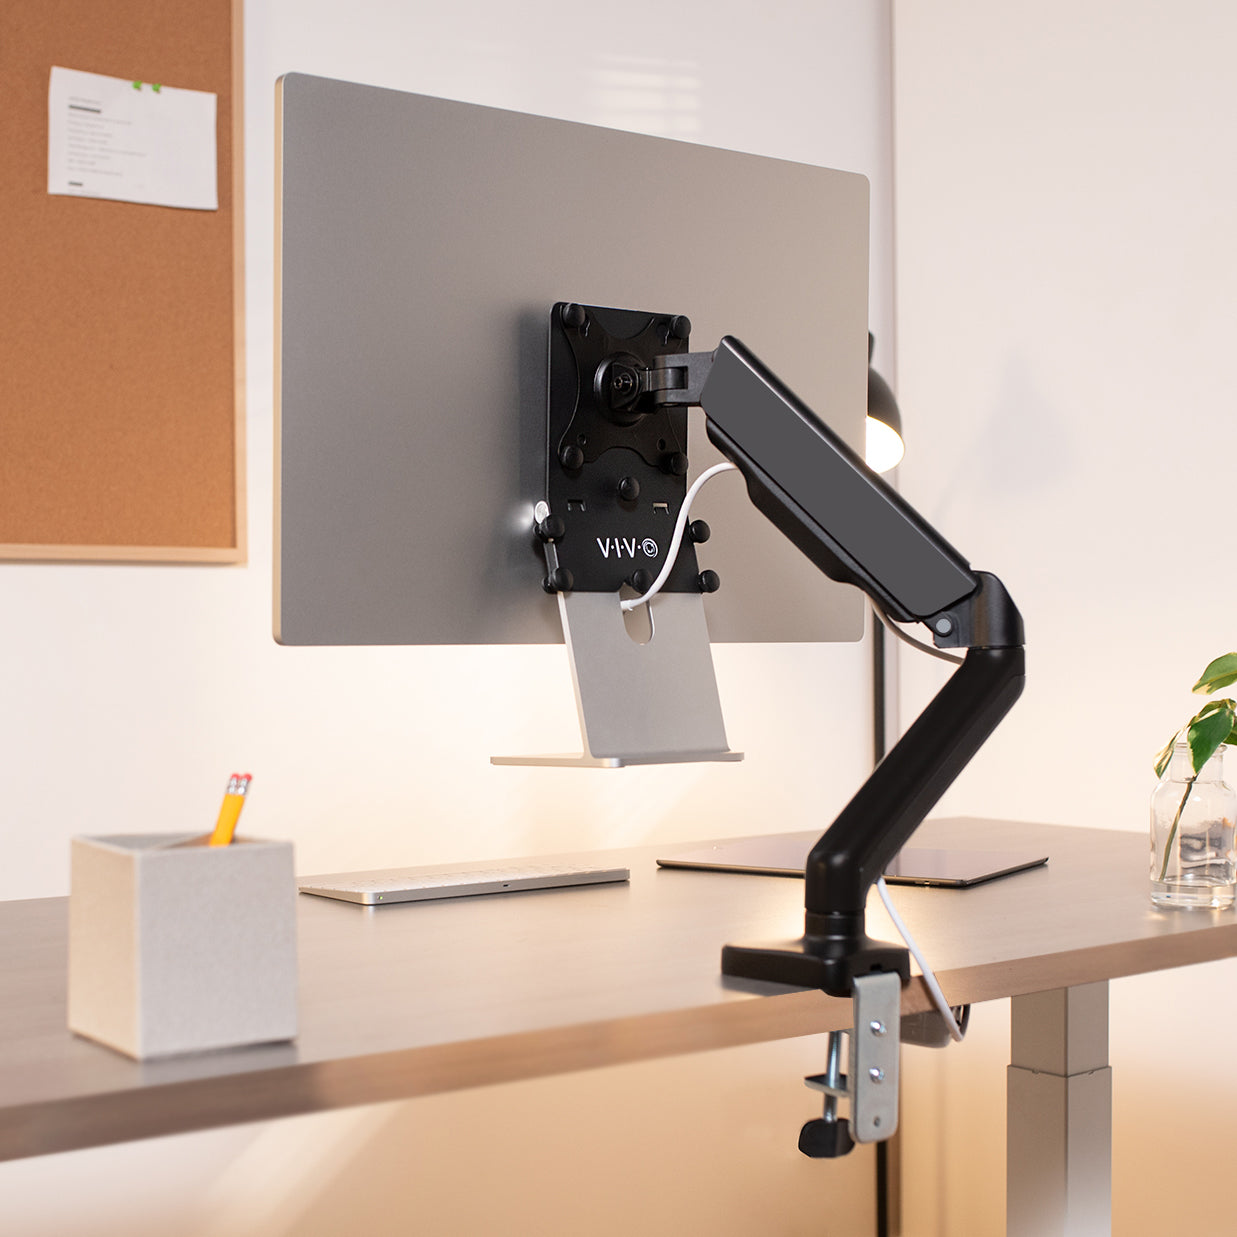  A MAC with an adjustable bracket to attach to a clamp on the desk mount.